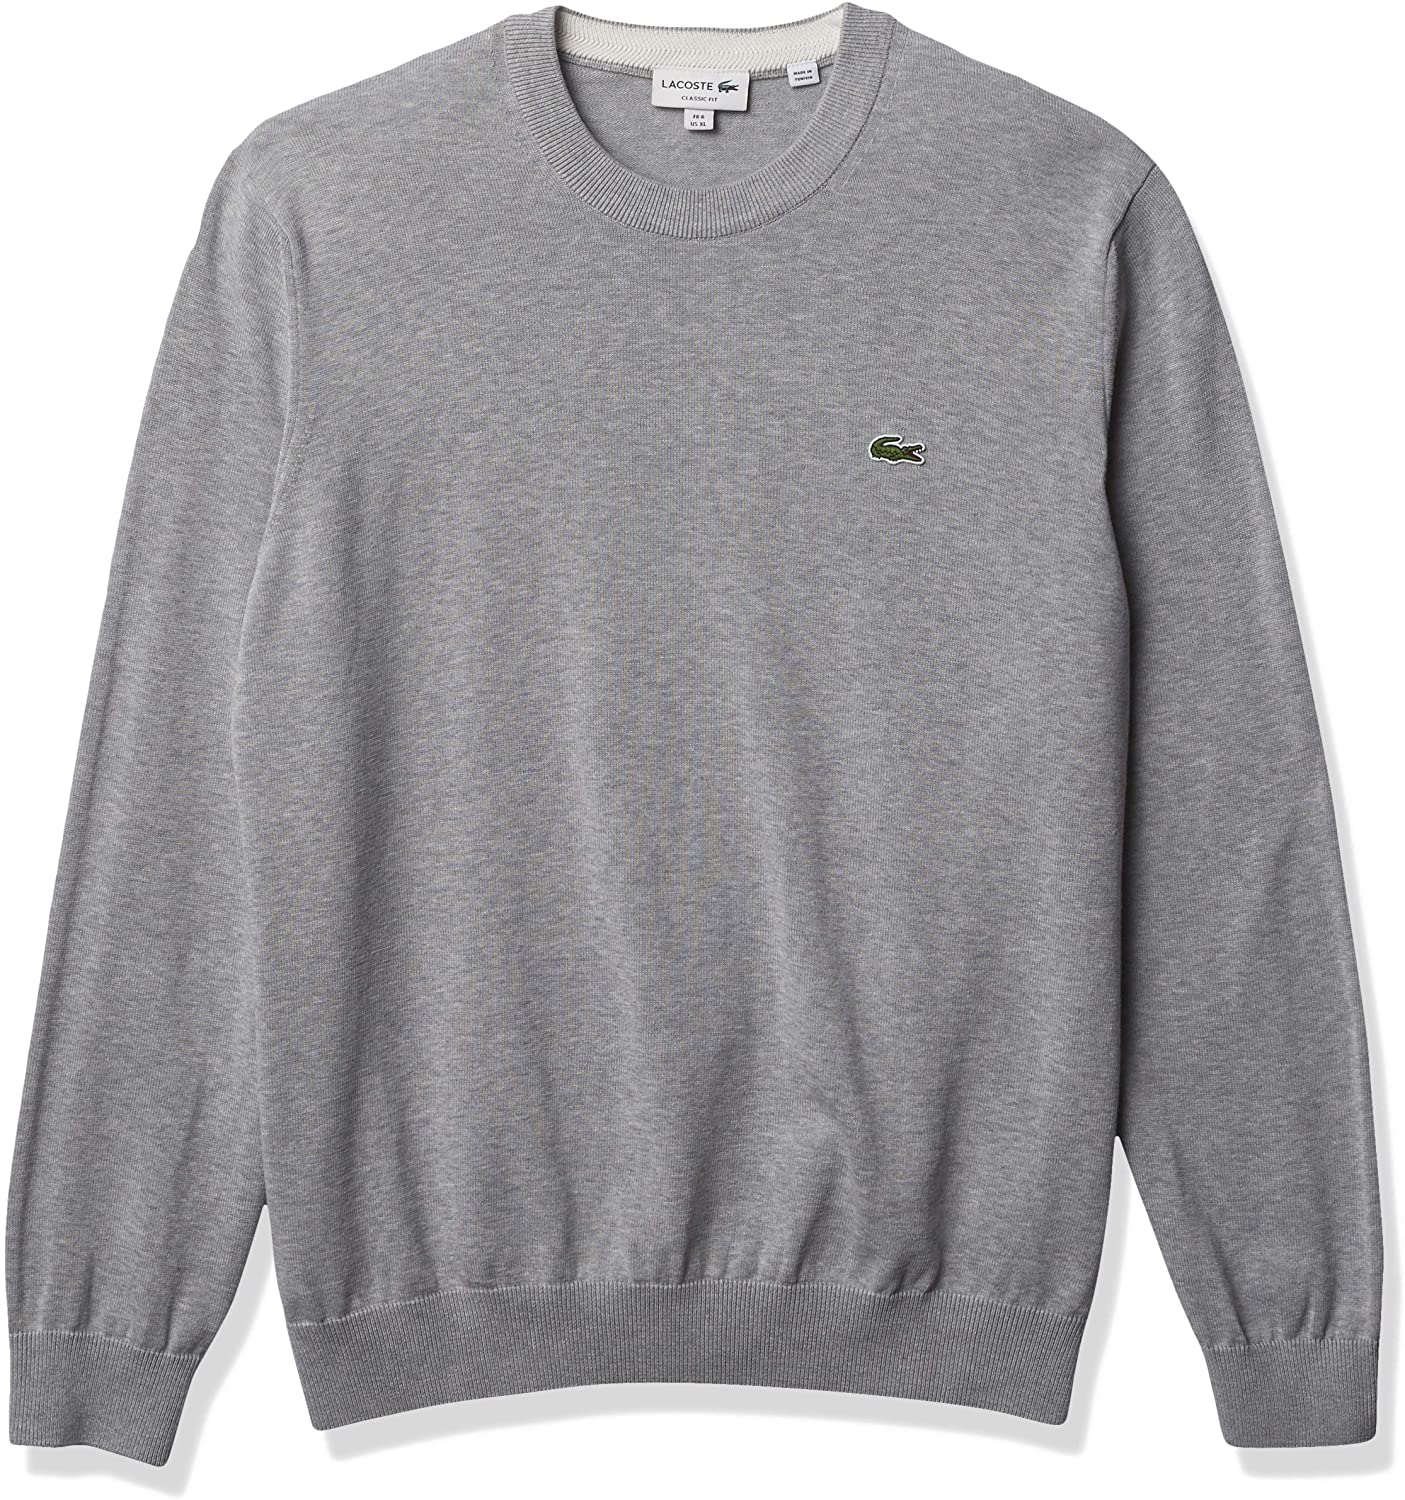 Lacoste Crew Neck Jumper in Silver Chine Grey 100% cotton knit sweater 